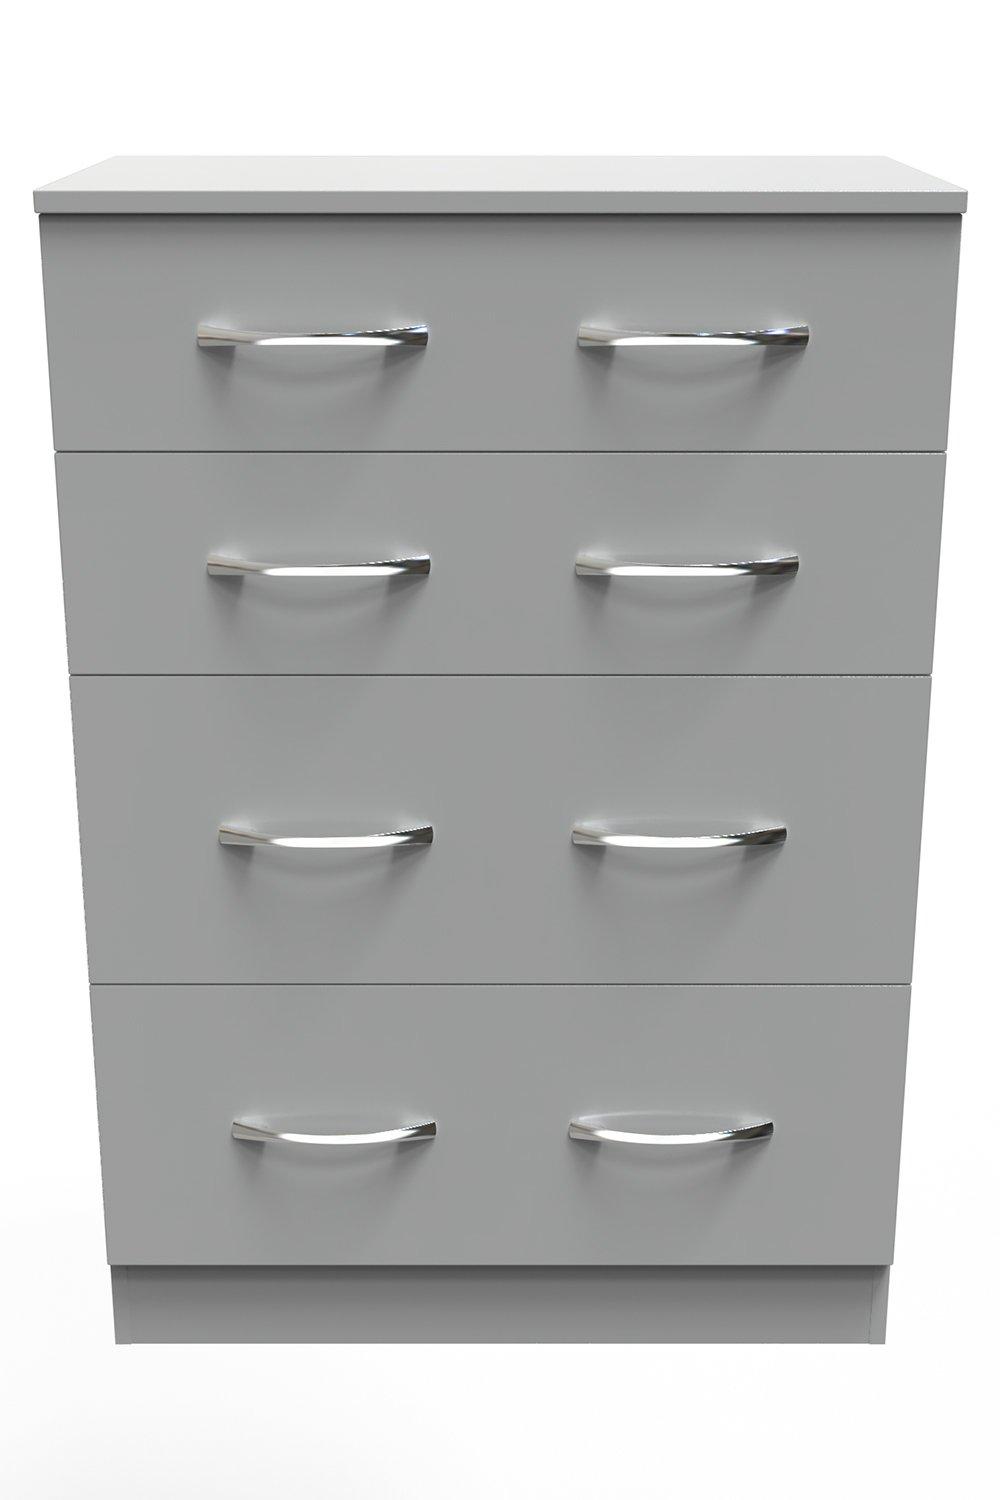 Hampshire 4 Drawer Deep Chest (Ready Assembled)